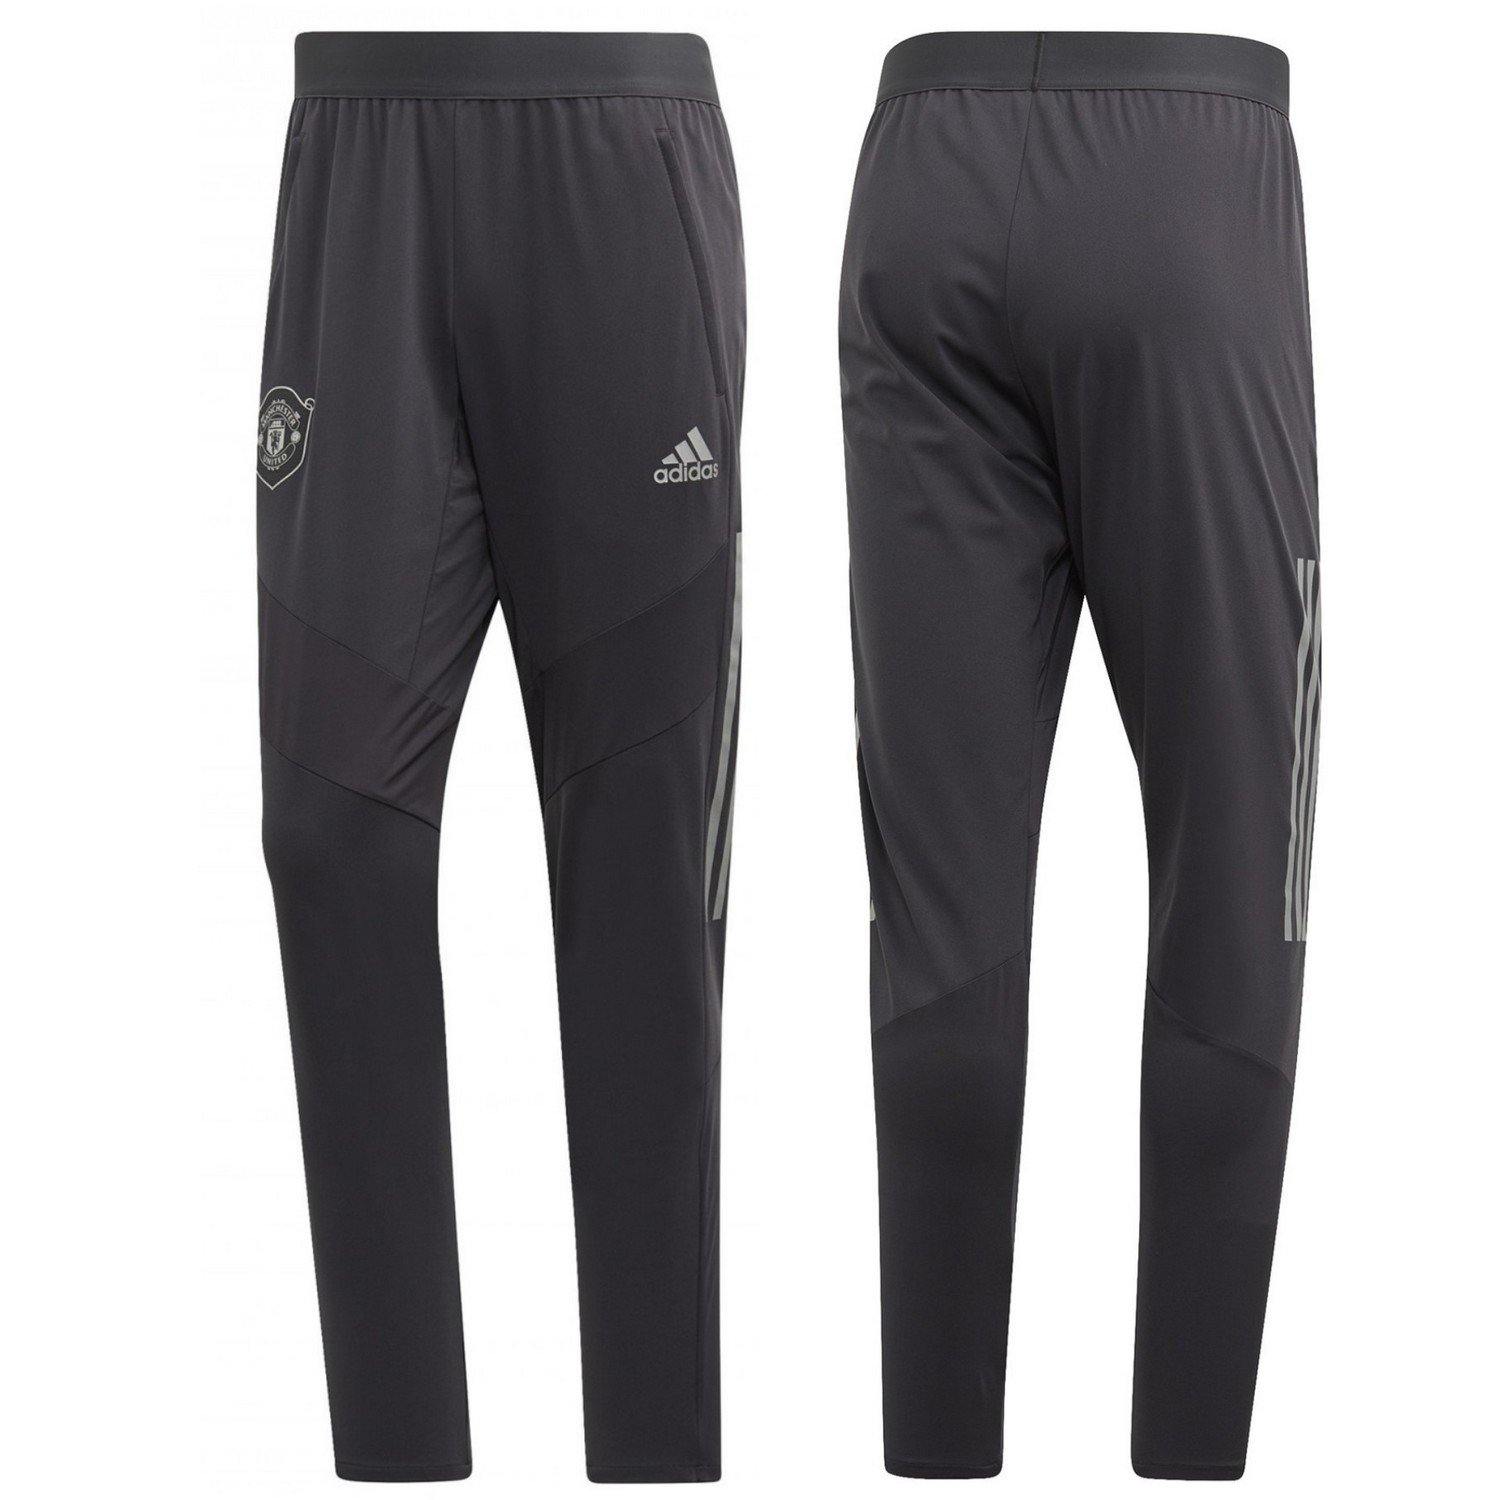 United training technical tracksuit UCL 2019/20 - Adidas – SoccerTracksuits.com